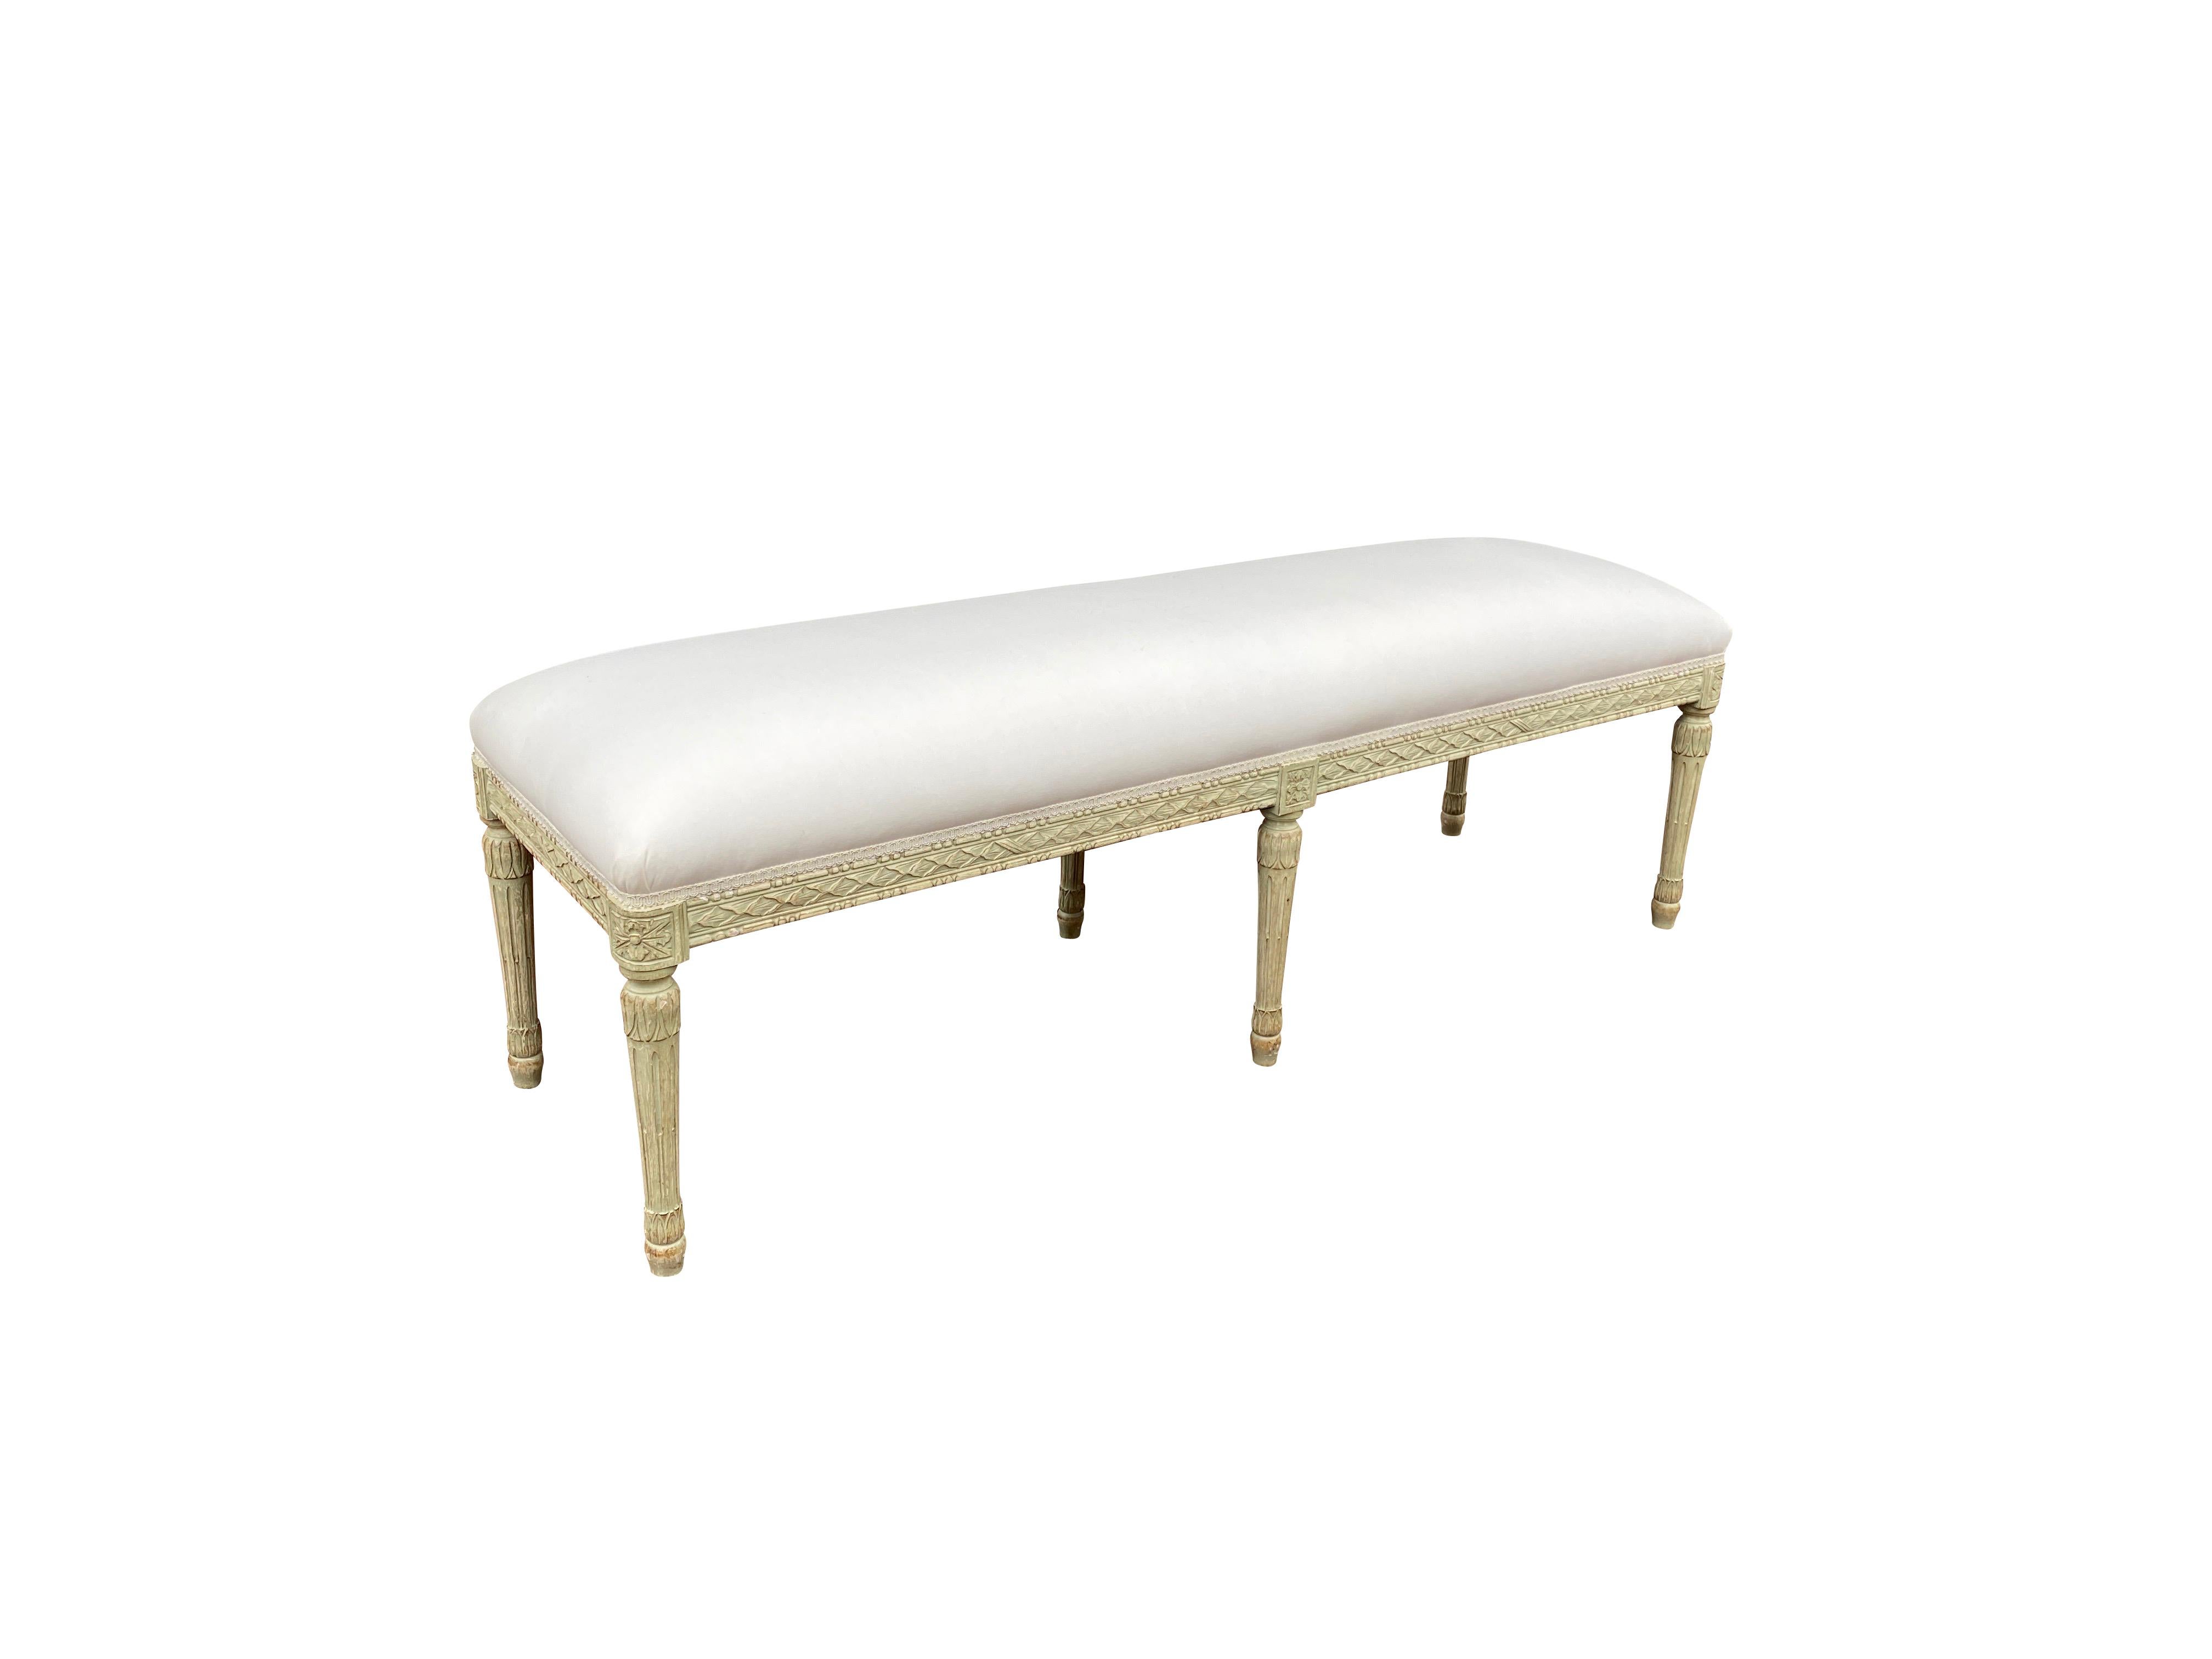 Rectangular upholstered seat and leaf carved frame and carved paterae at the top of the legs, circular fluted tapered legs.